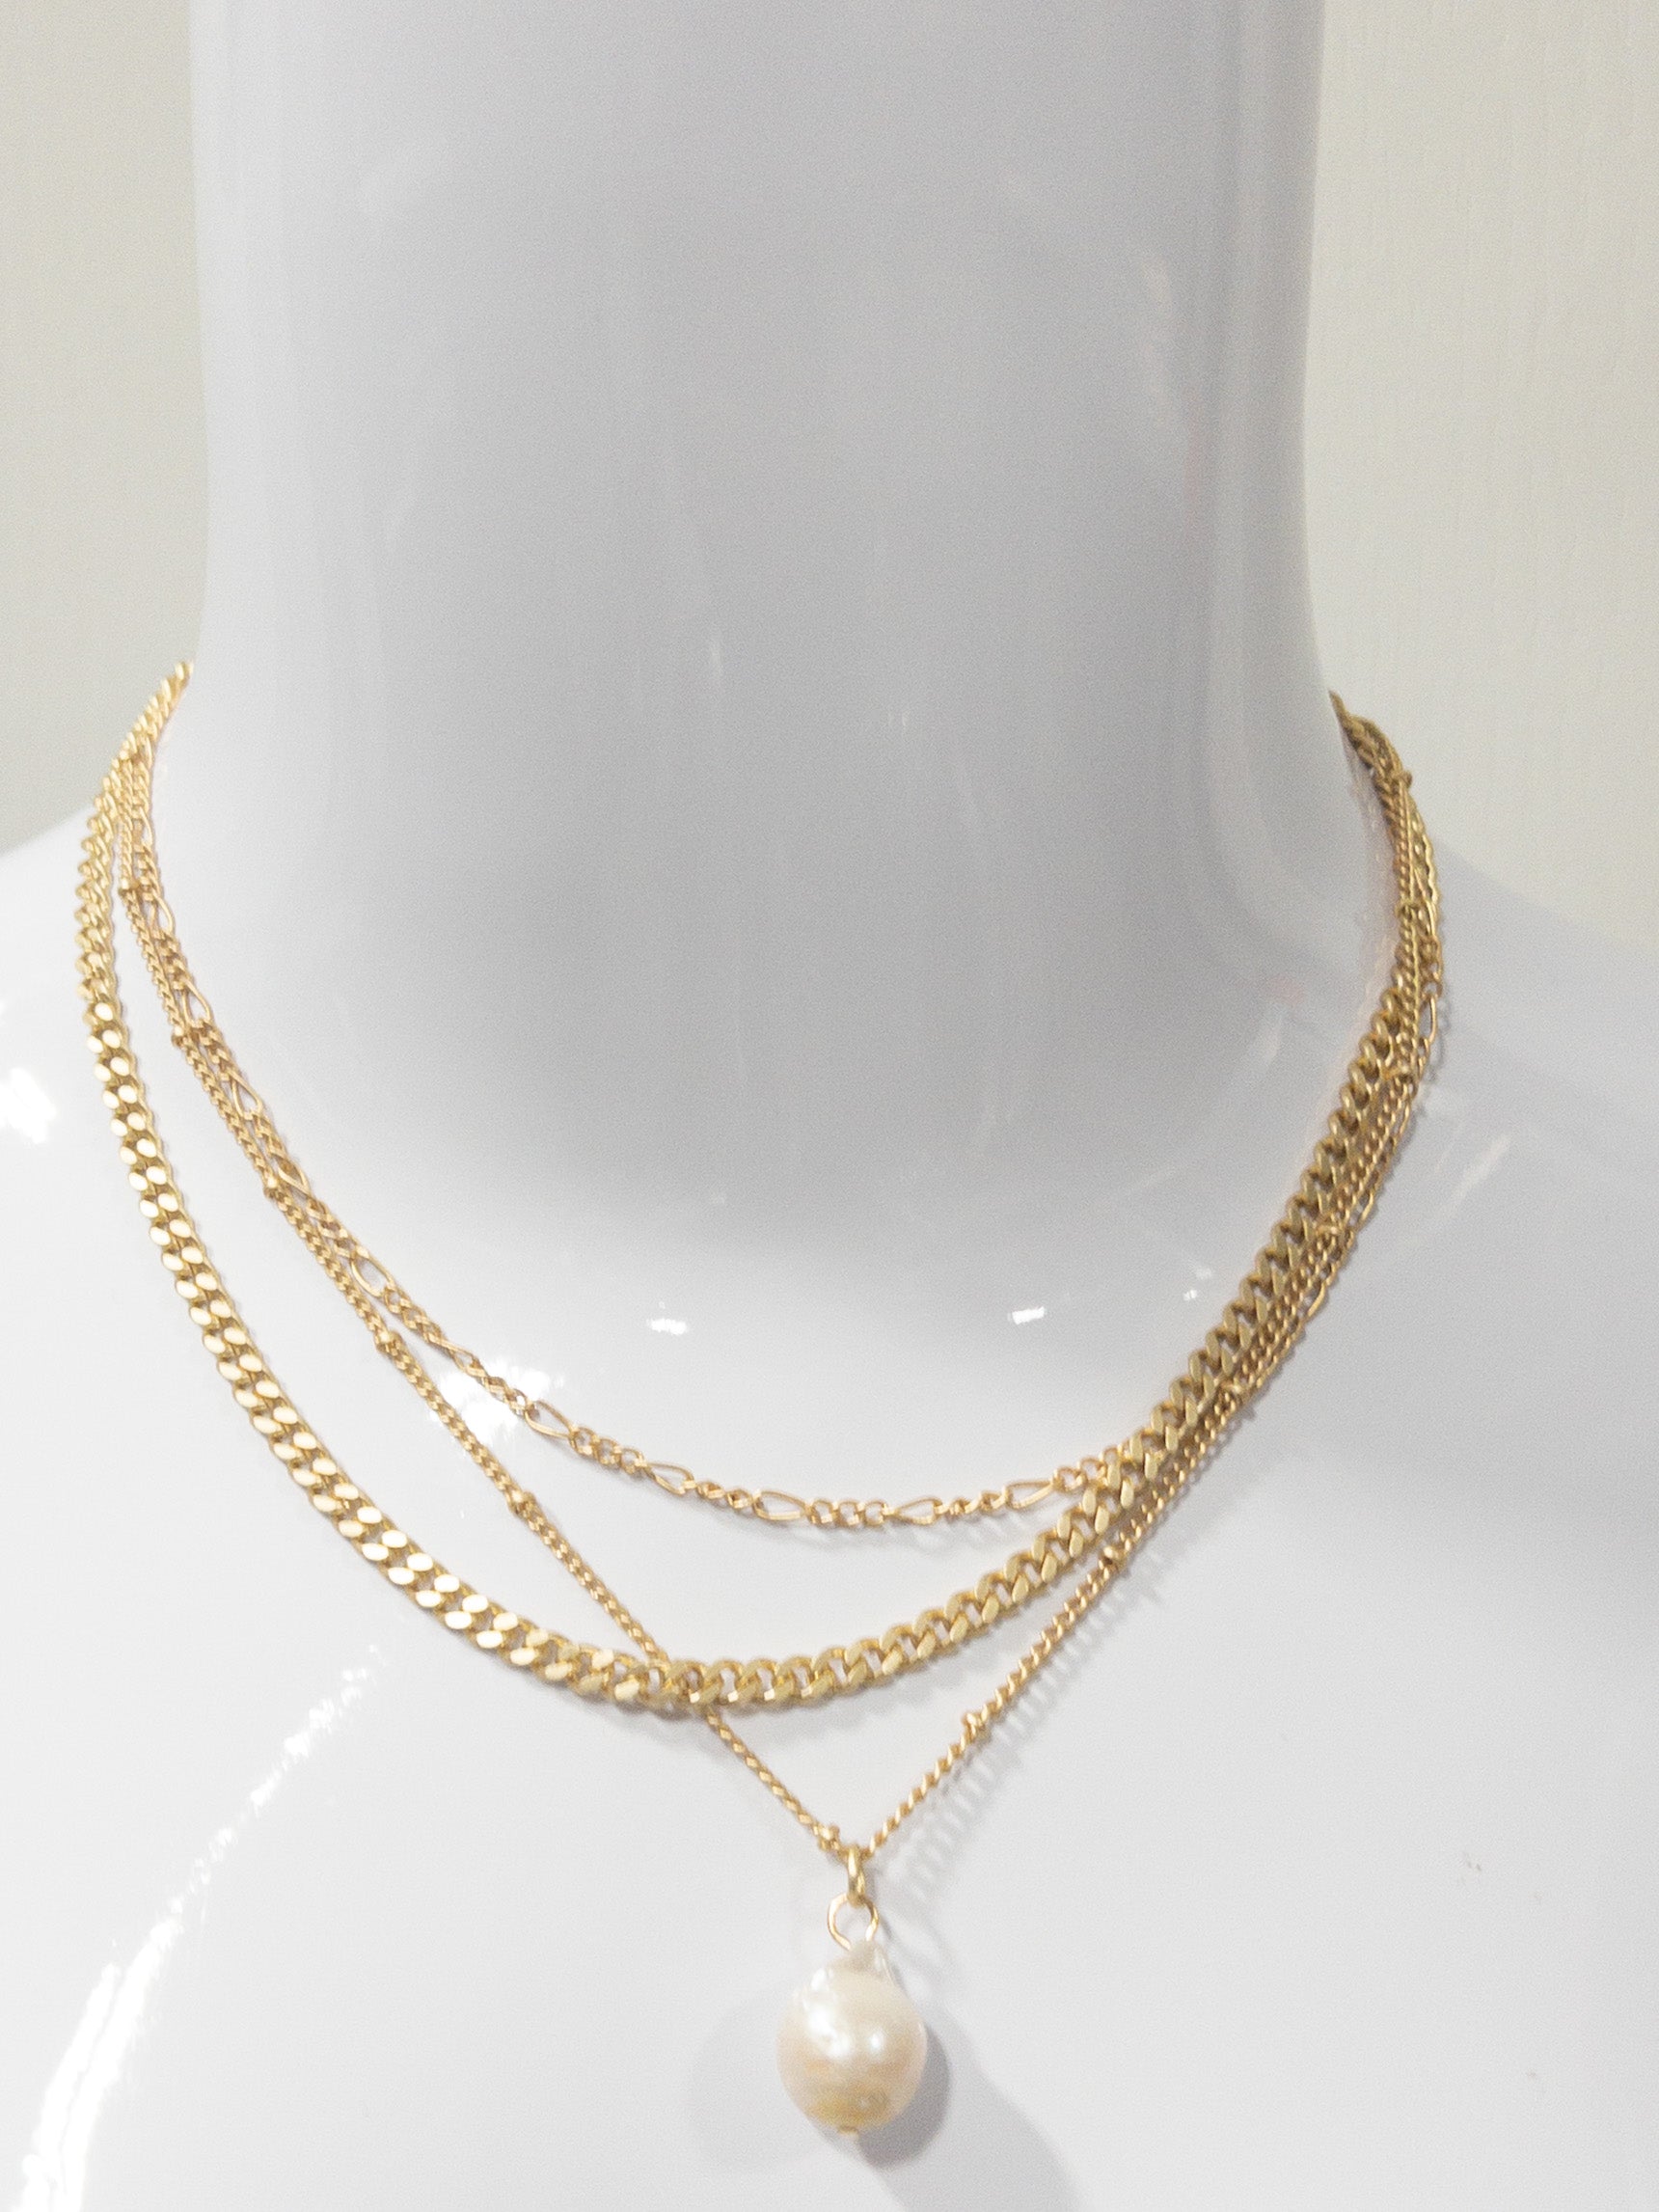 3 STRAND, MULTI CHAIN WITH FIGARO, CURB, SATELLITE WITH PEARL DROP NECKLACE